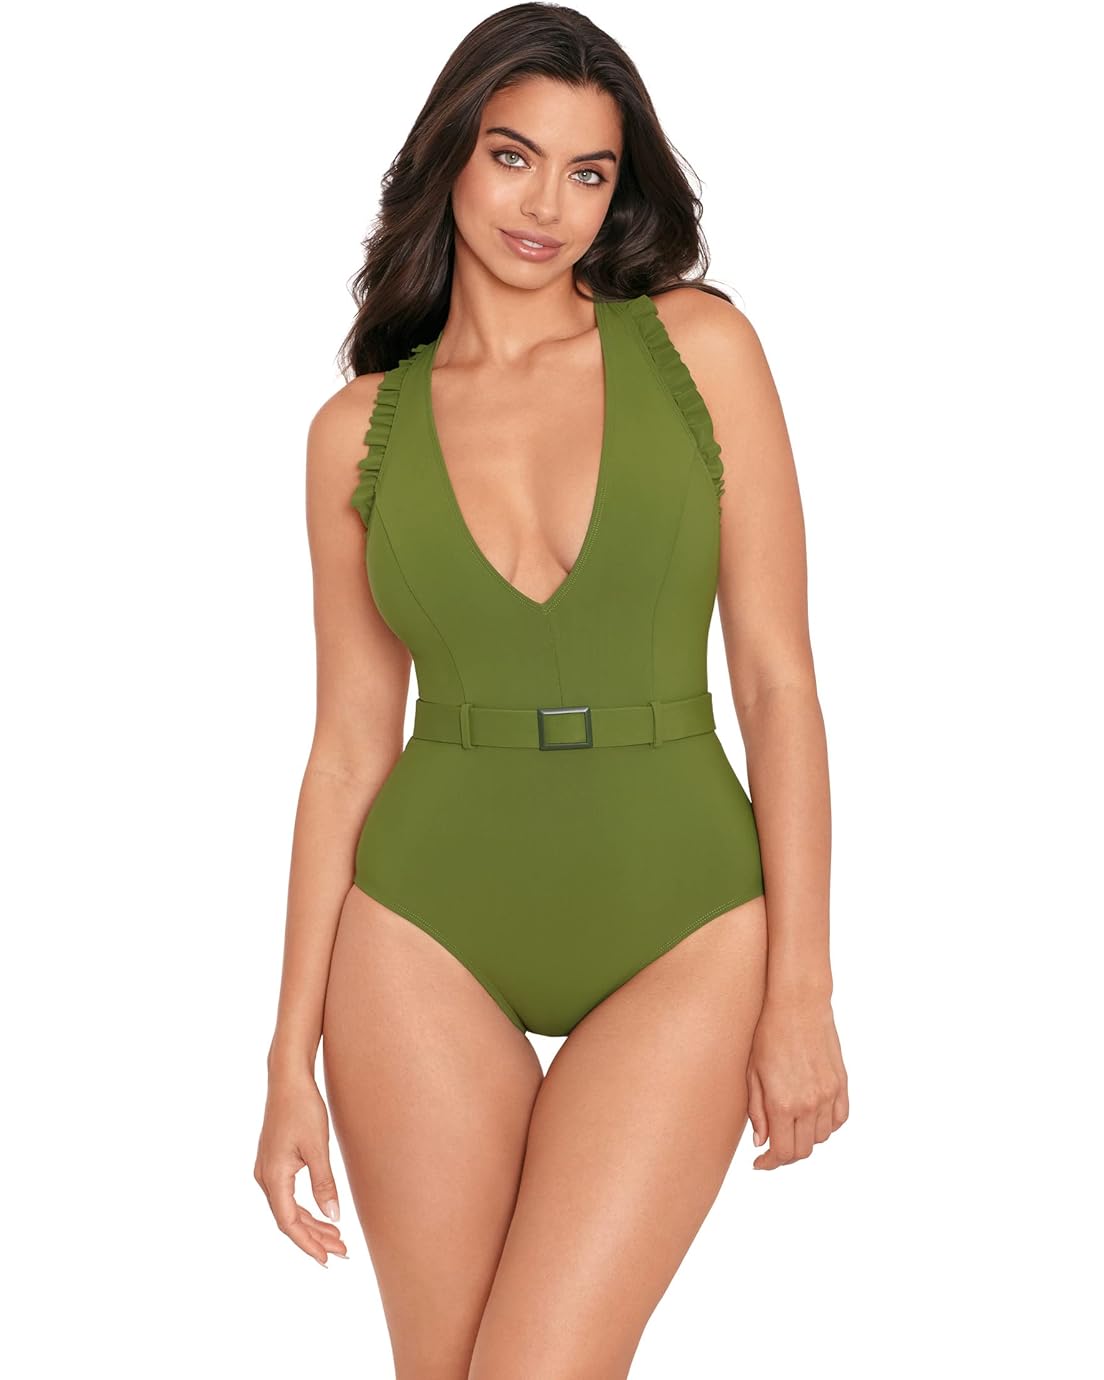 Skinny Dippers Jelly Beans Cinch One-Piece